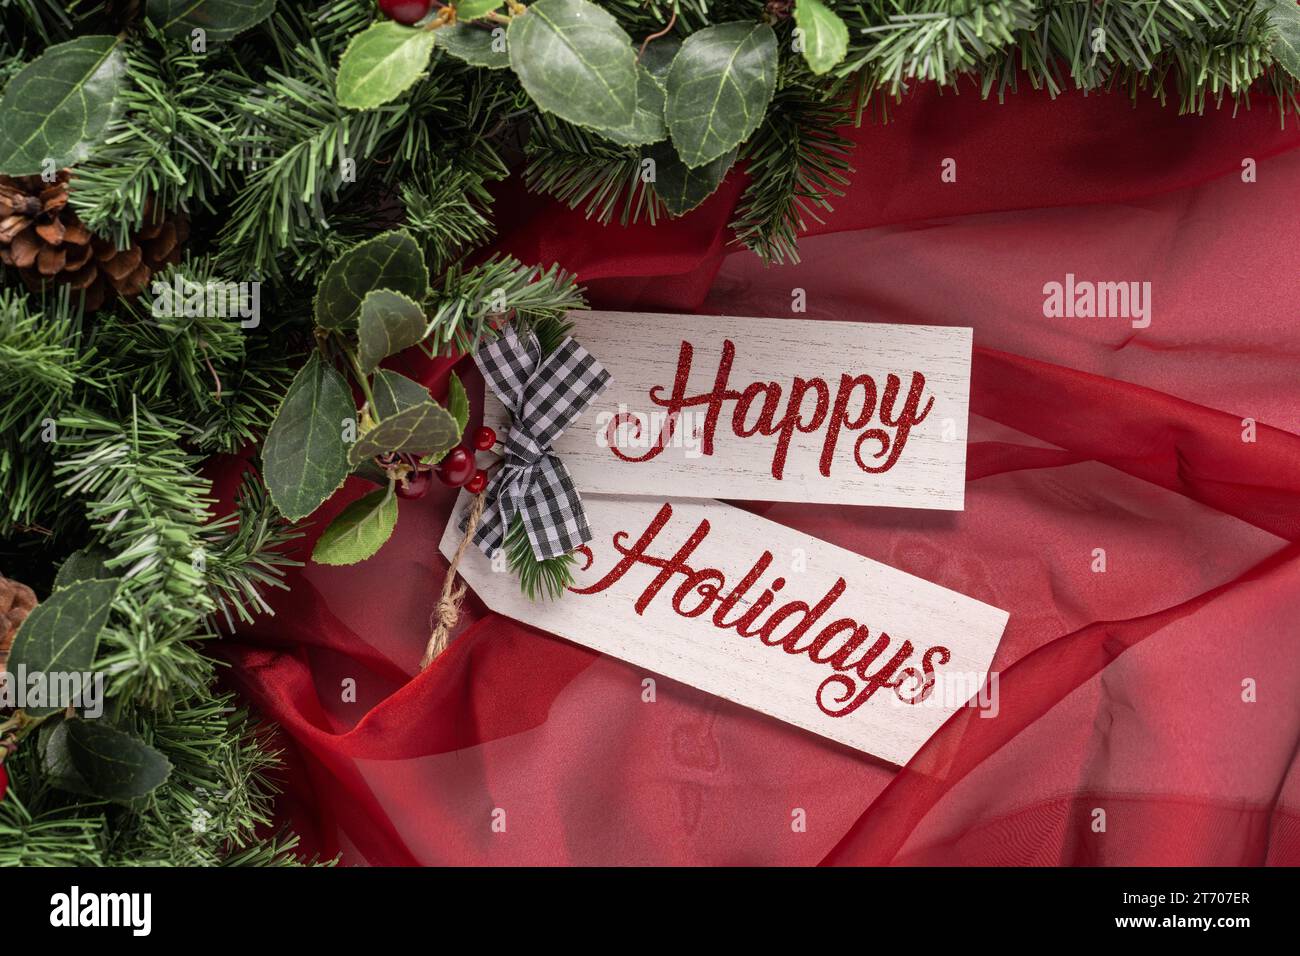 Happy Holidays  text on wooden board with sheer red fabric, greenery, and a small black and white gingham bow Stock Photo